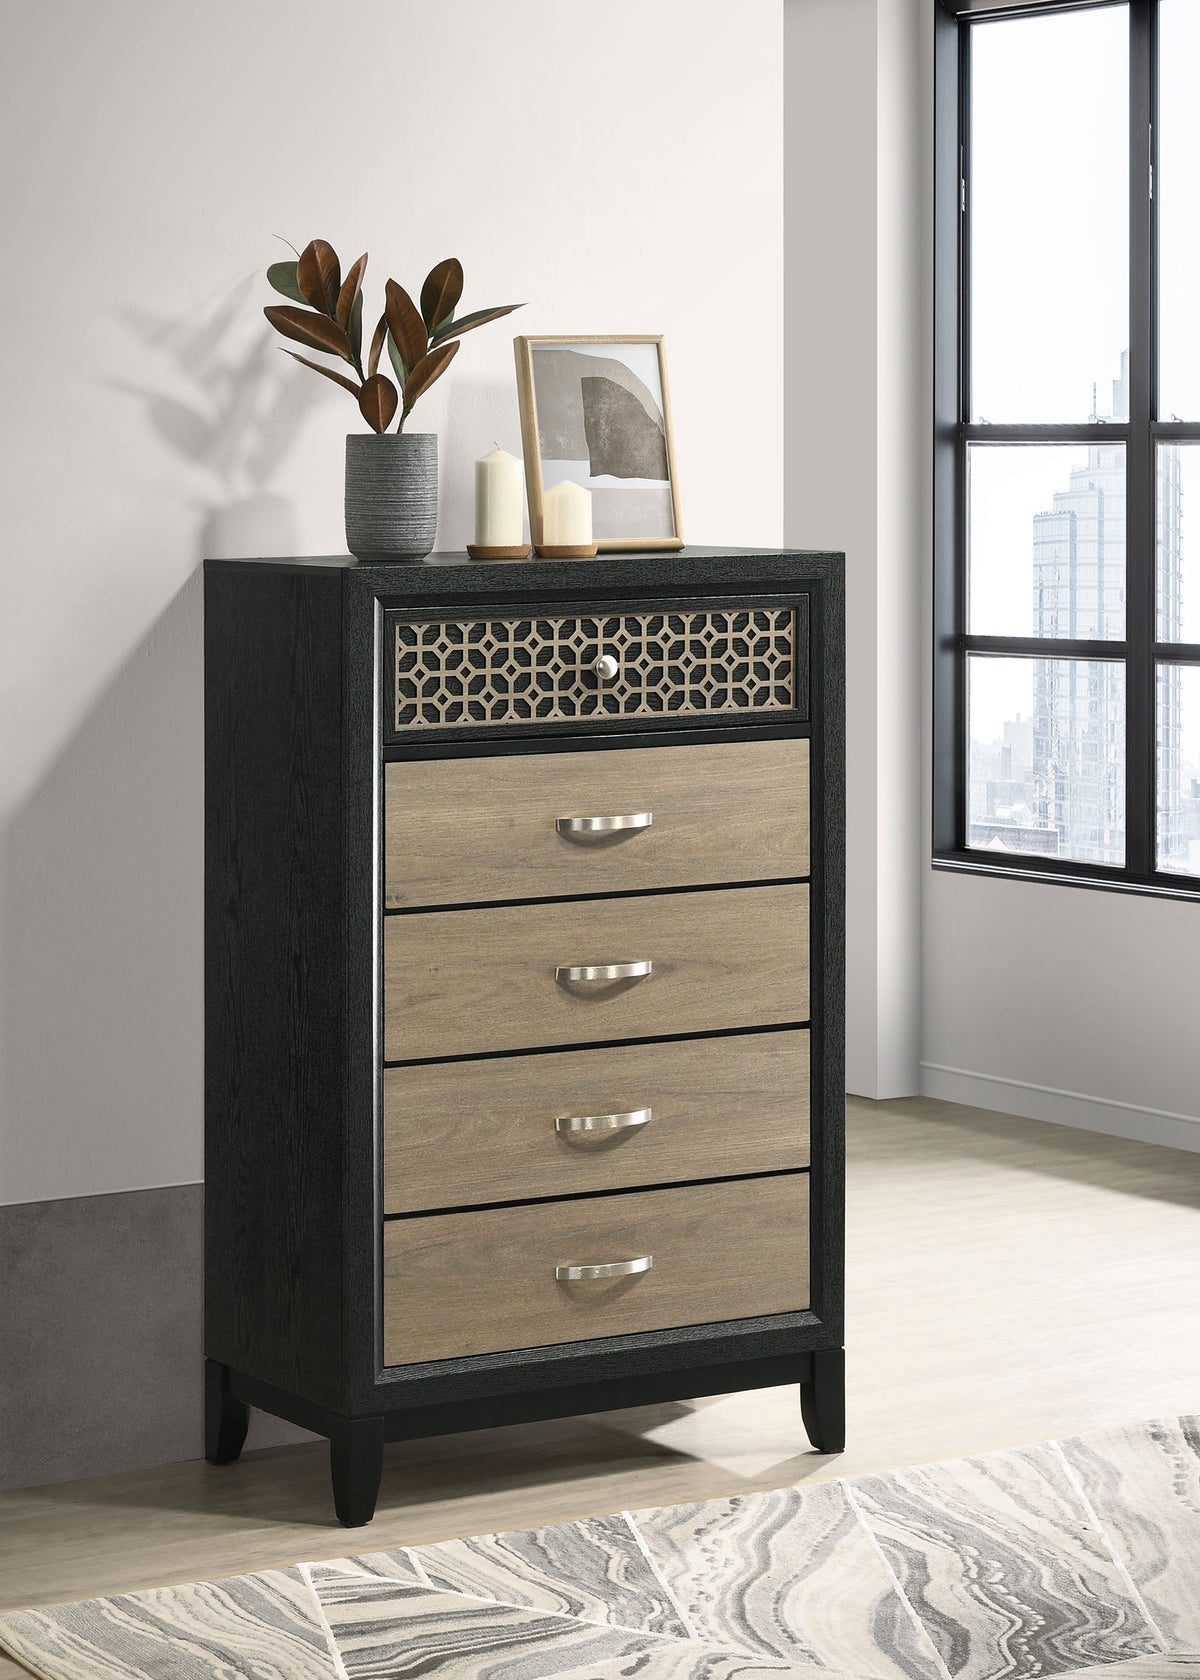 Valencia 5-drawer Chest Light Brown and Black Valencia 5-drawer Chest Light Brown and Black Half Price Furniture